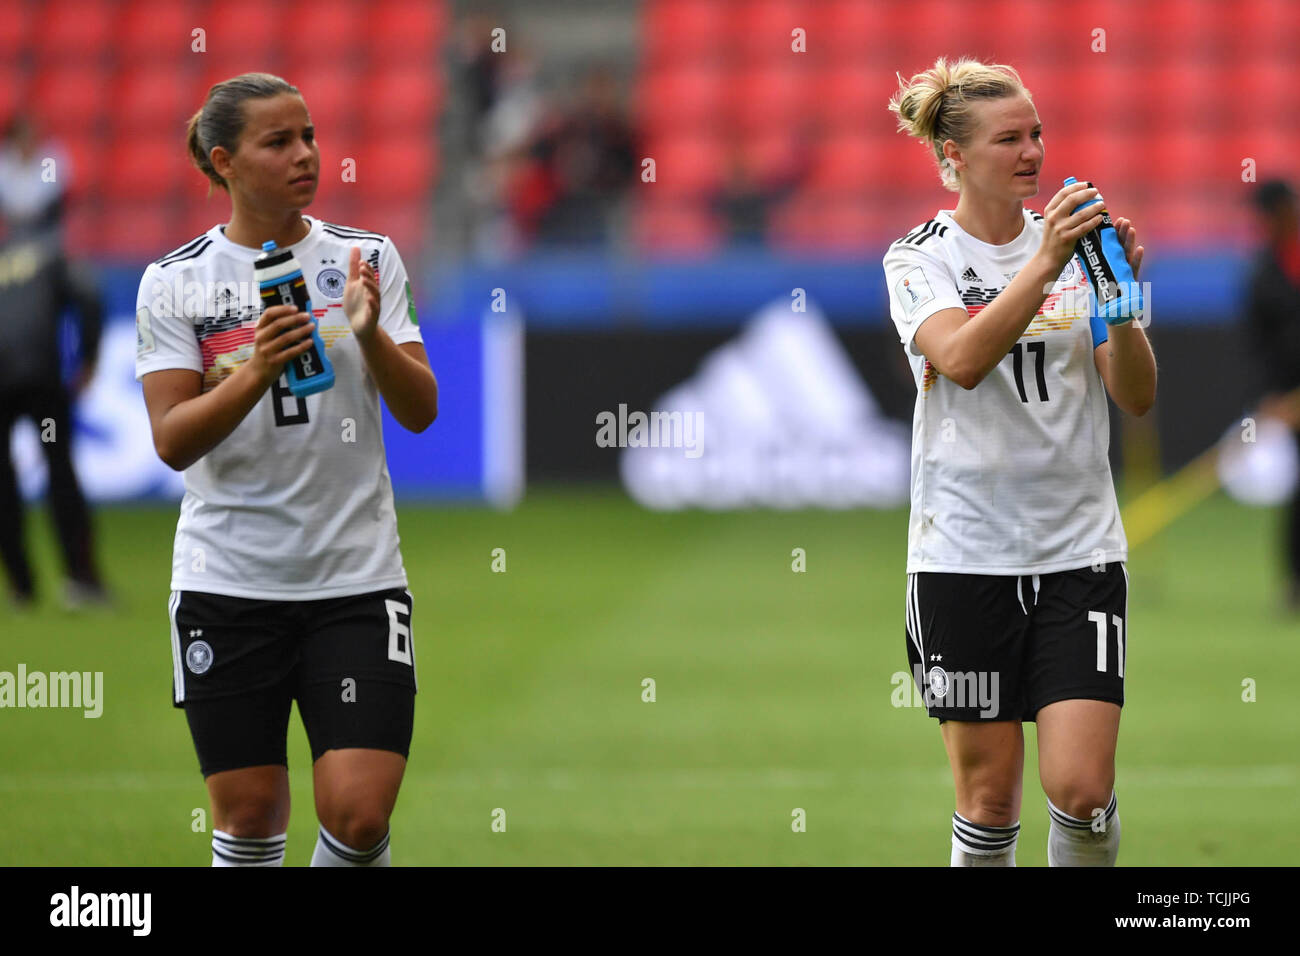 8 june 2019 Rennes, France Soccer Women World Championships Germany v China  Lena Oberdorf (DFB-Frauen) (6) and Alexandra Popp (DFB-Frauen) (11) after the match at the fans Stock Photo